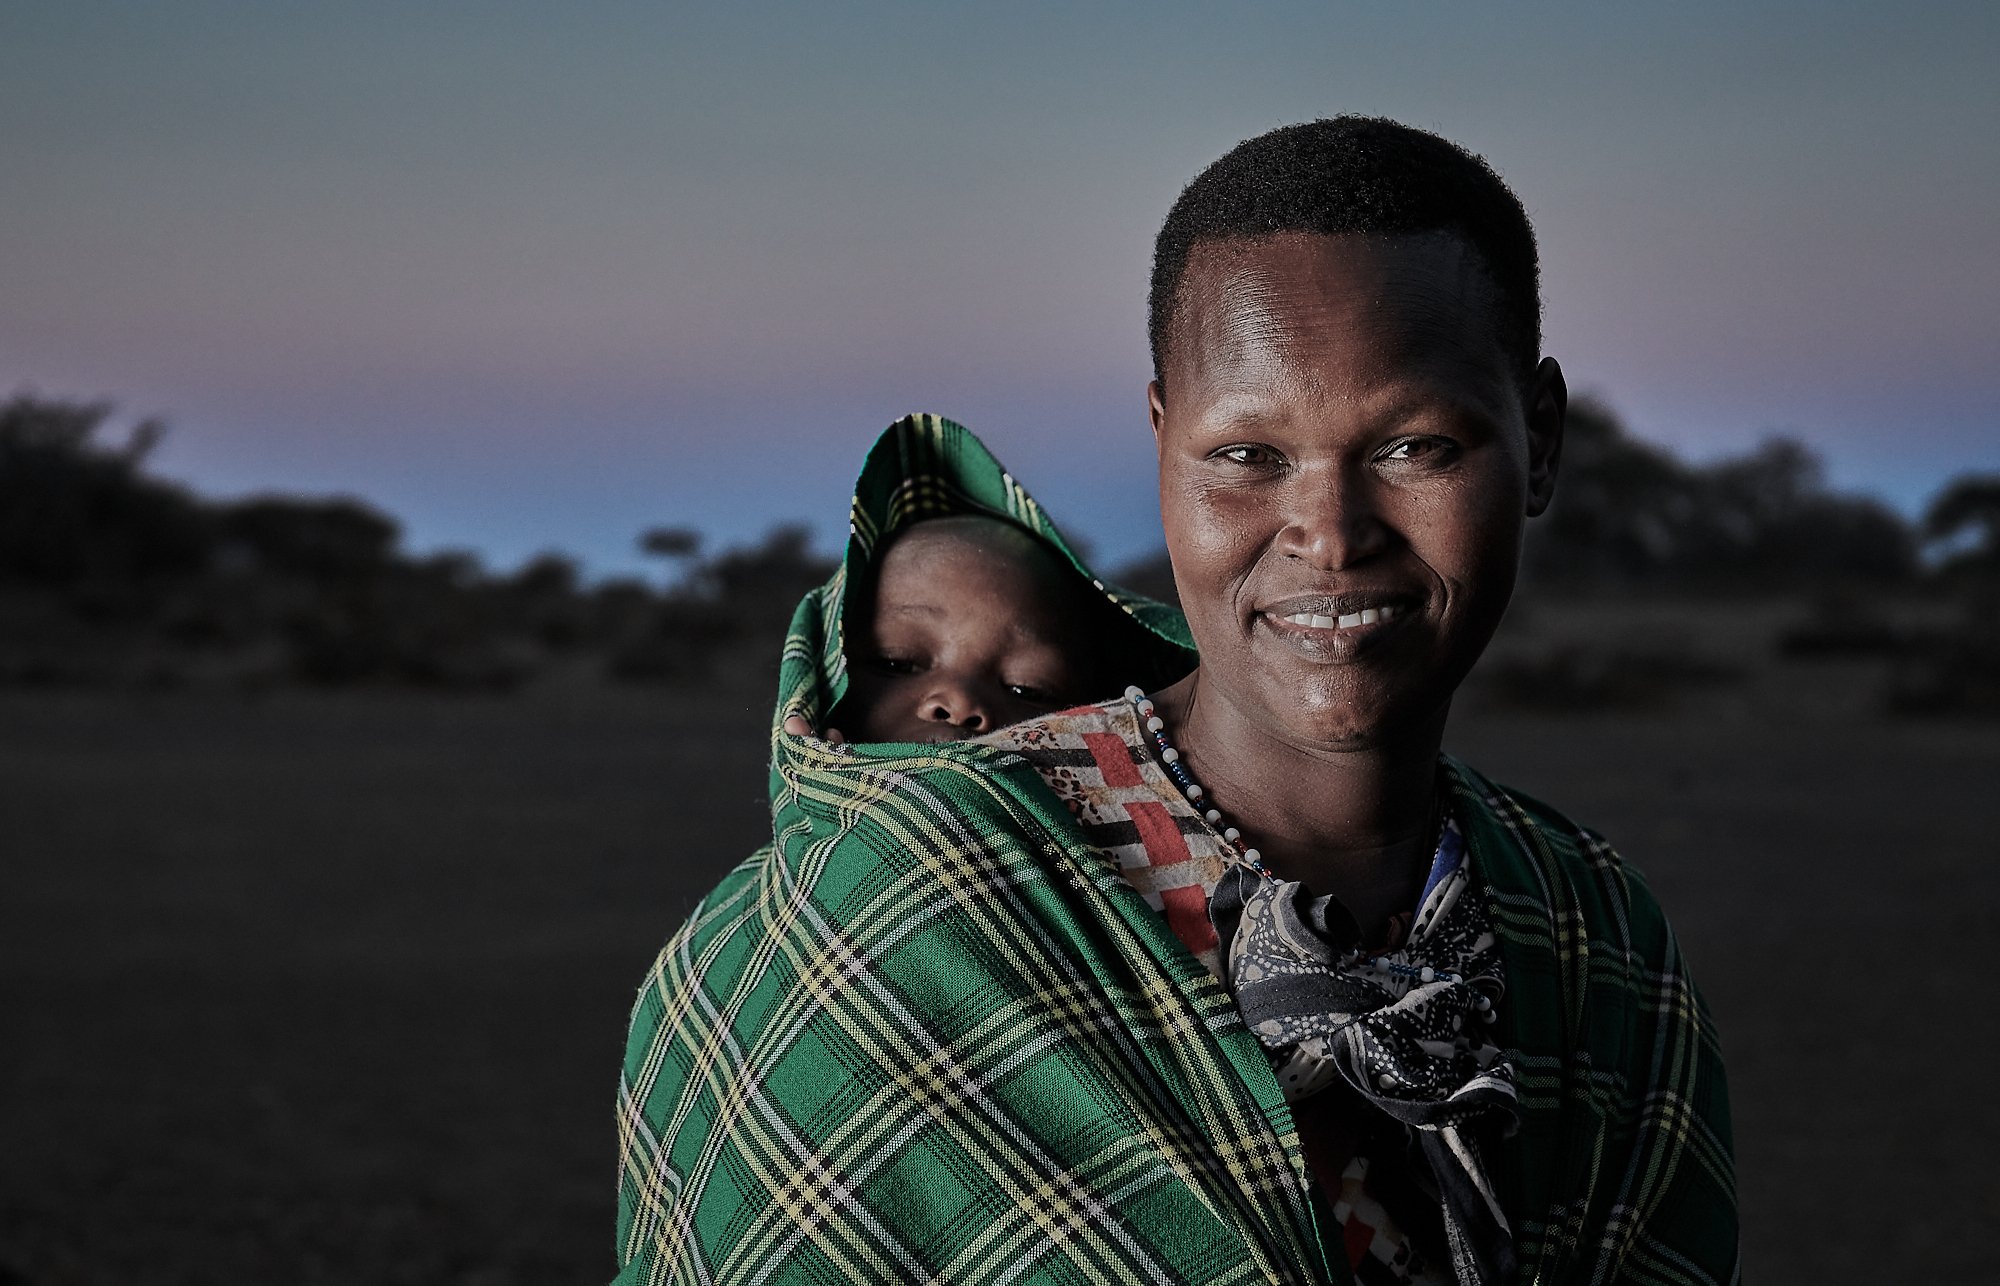 Young Datoga mother, village near the Rift Valley, northern Tanzania